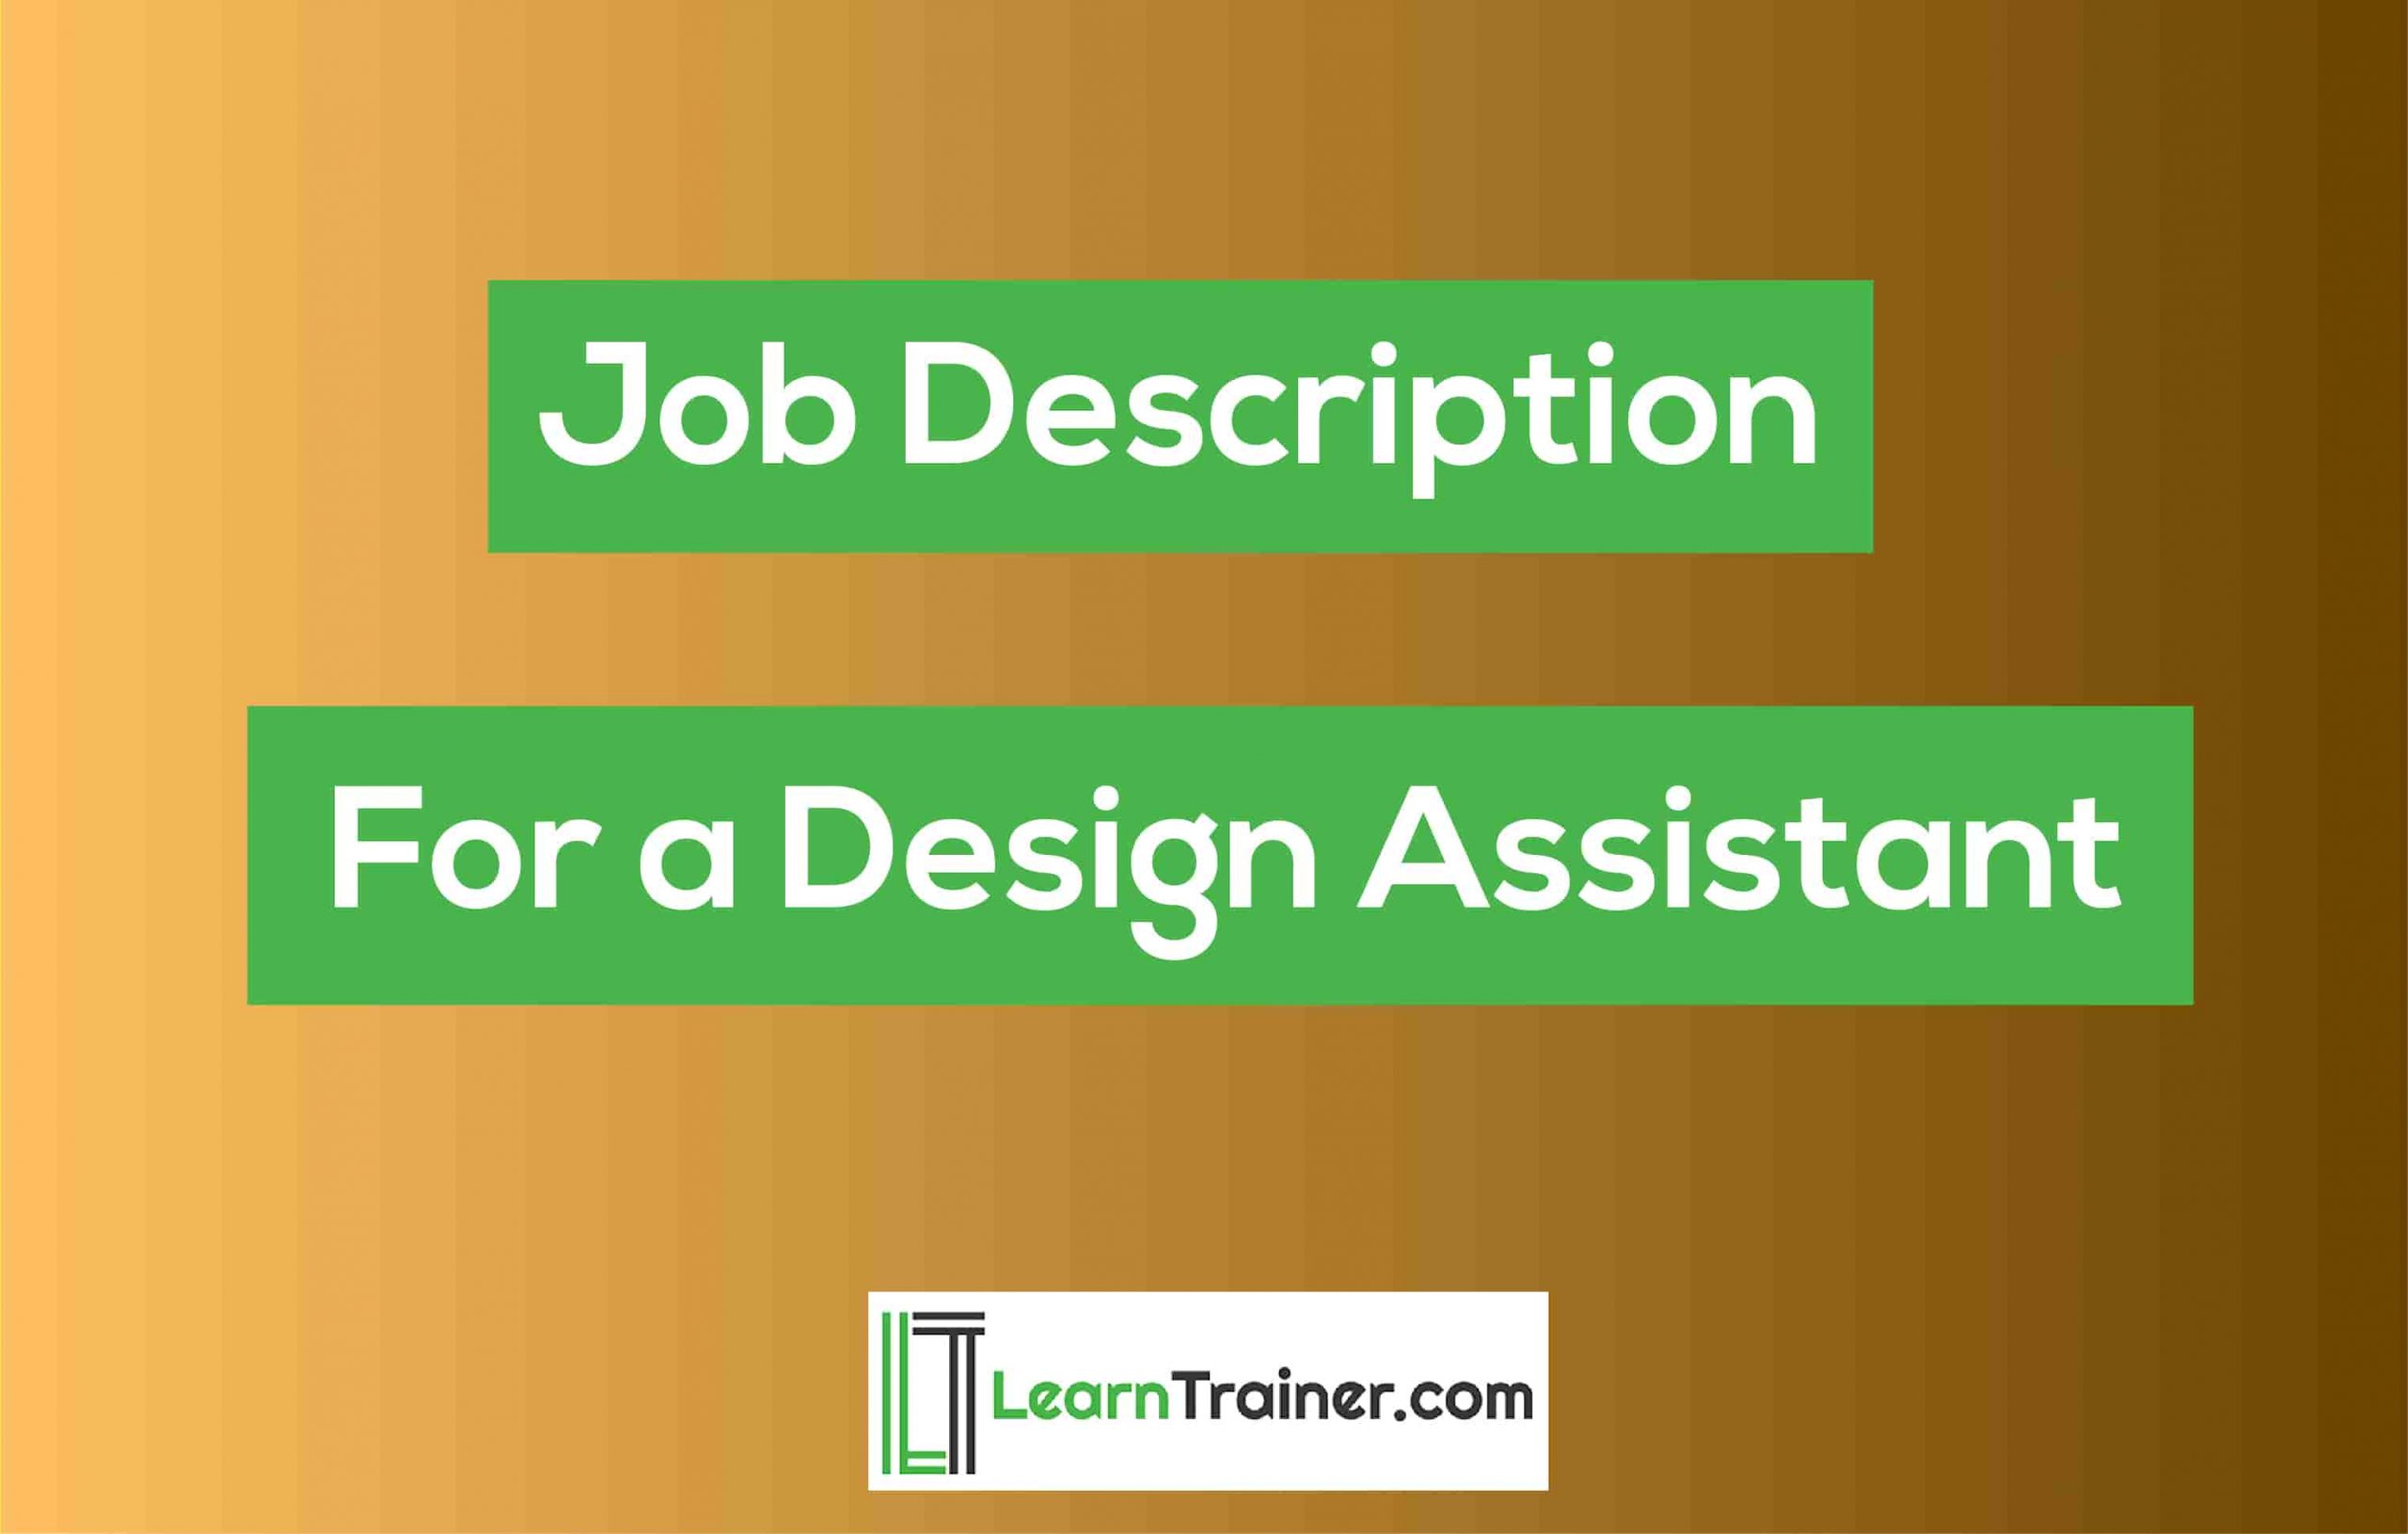 You are currently viewing 4 Job Description For a Design Assistant